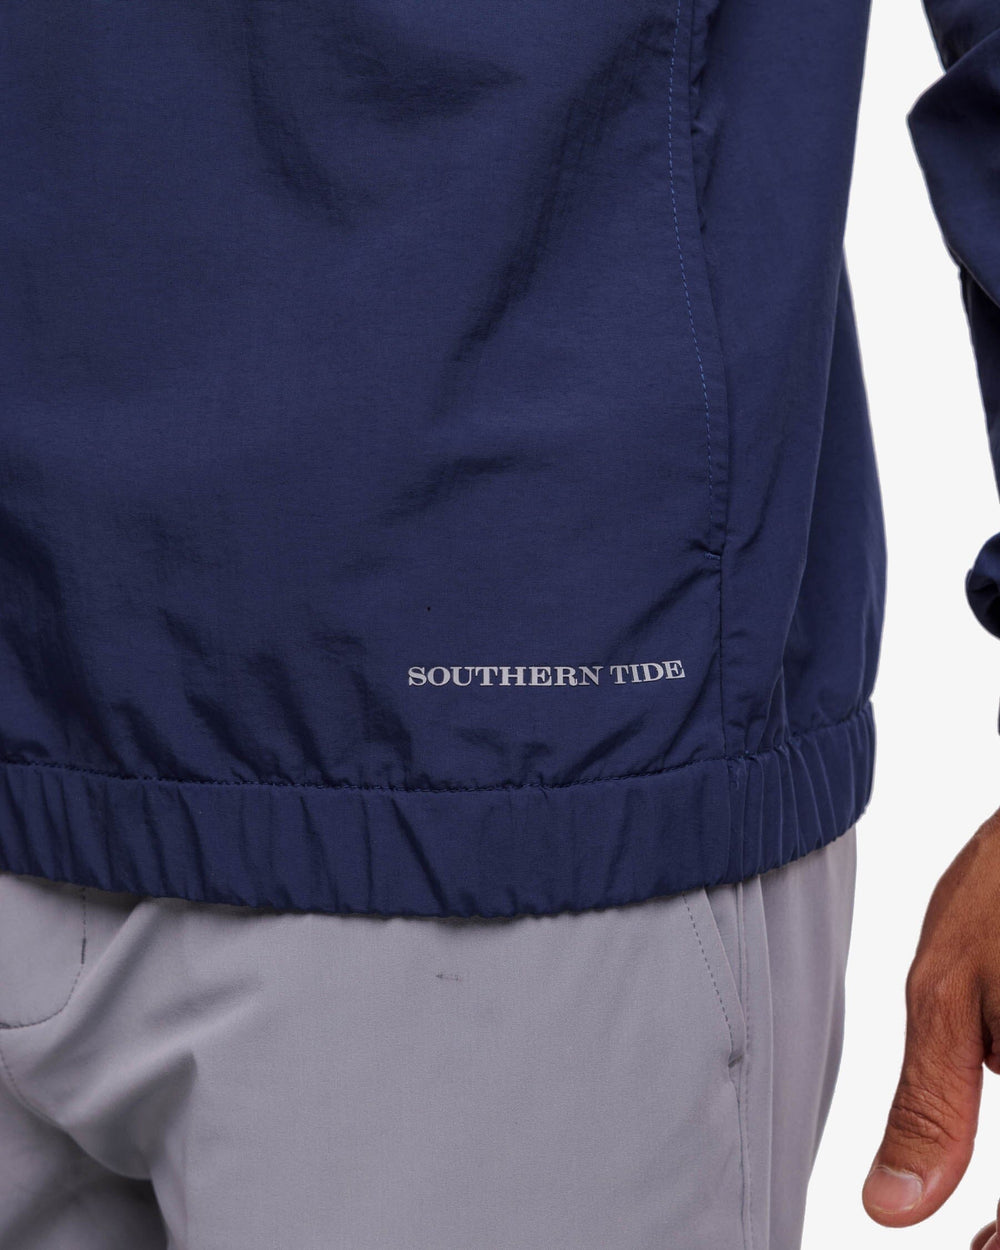 The label view of the Southern Tide Shoreline Performance Pullover by Southern Tide - True Navy